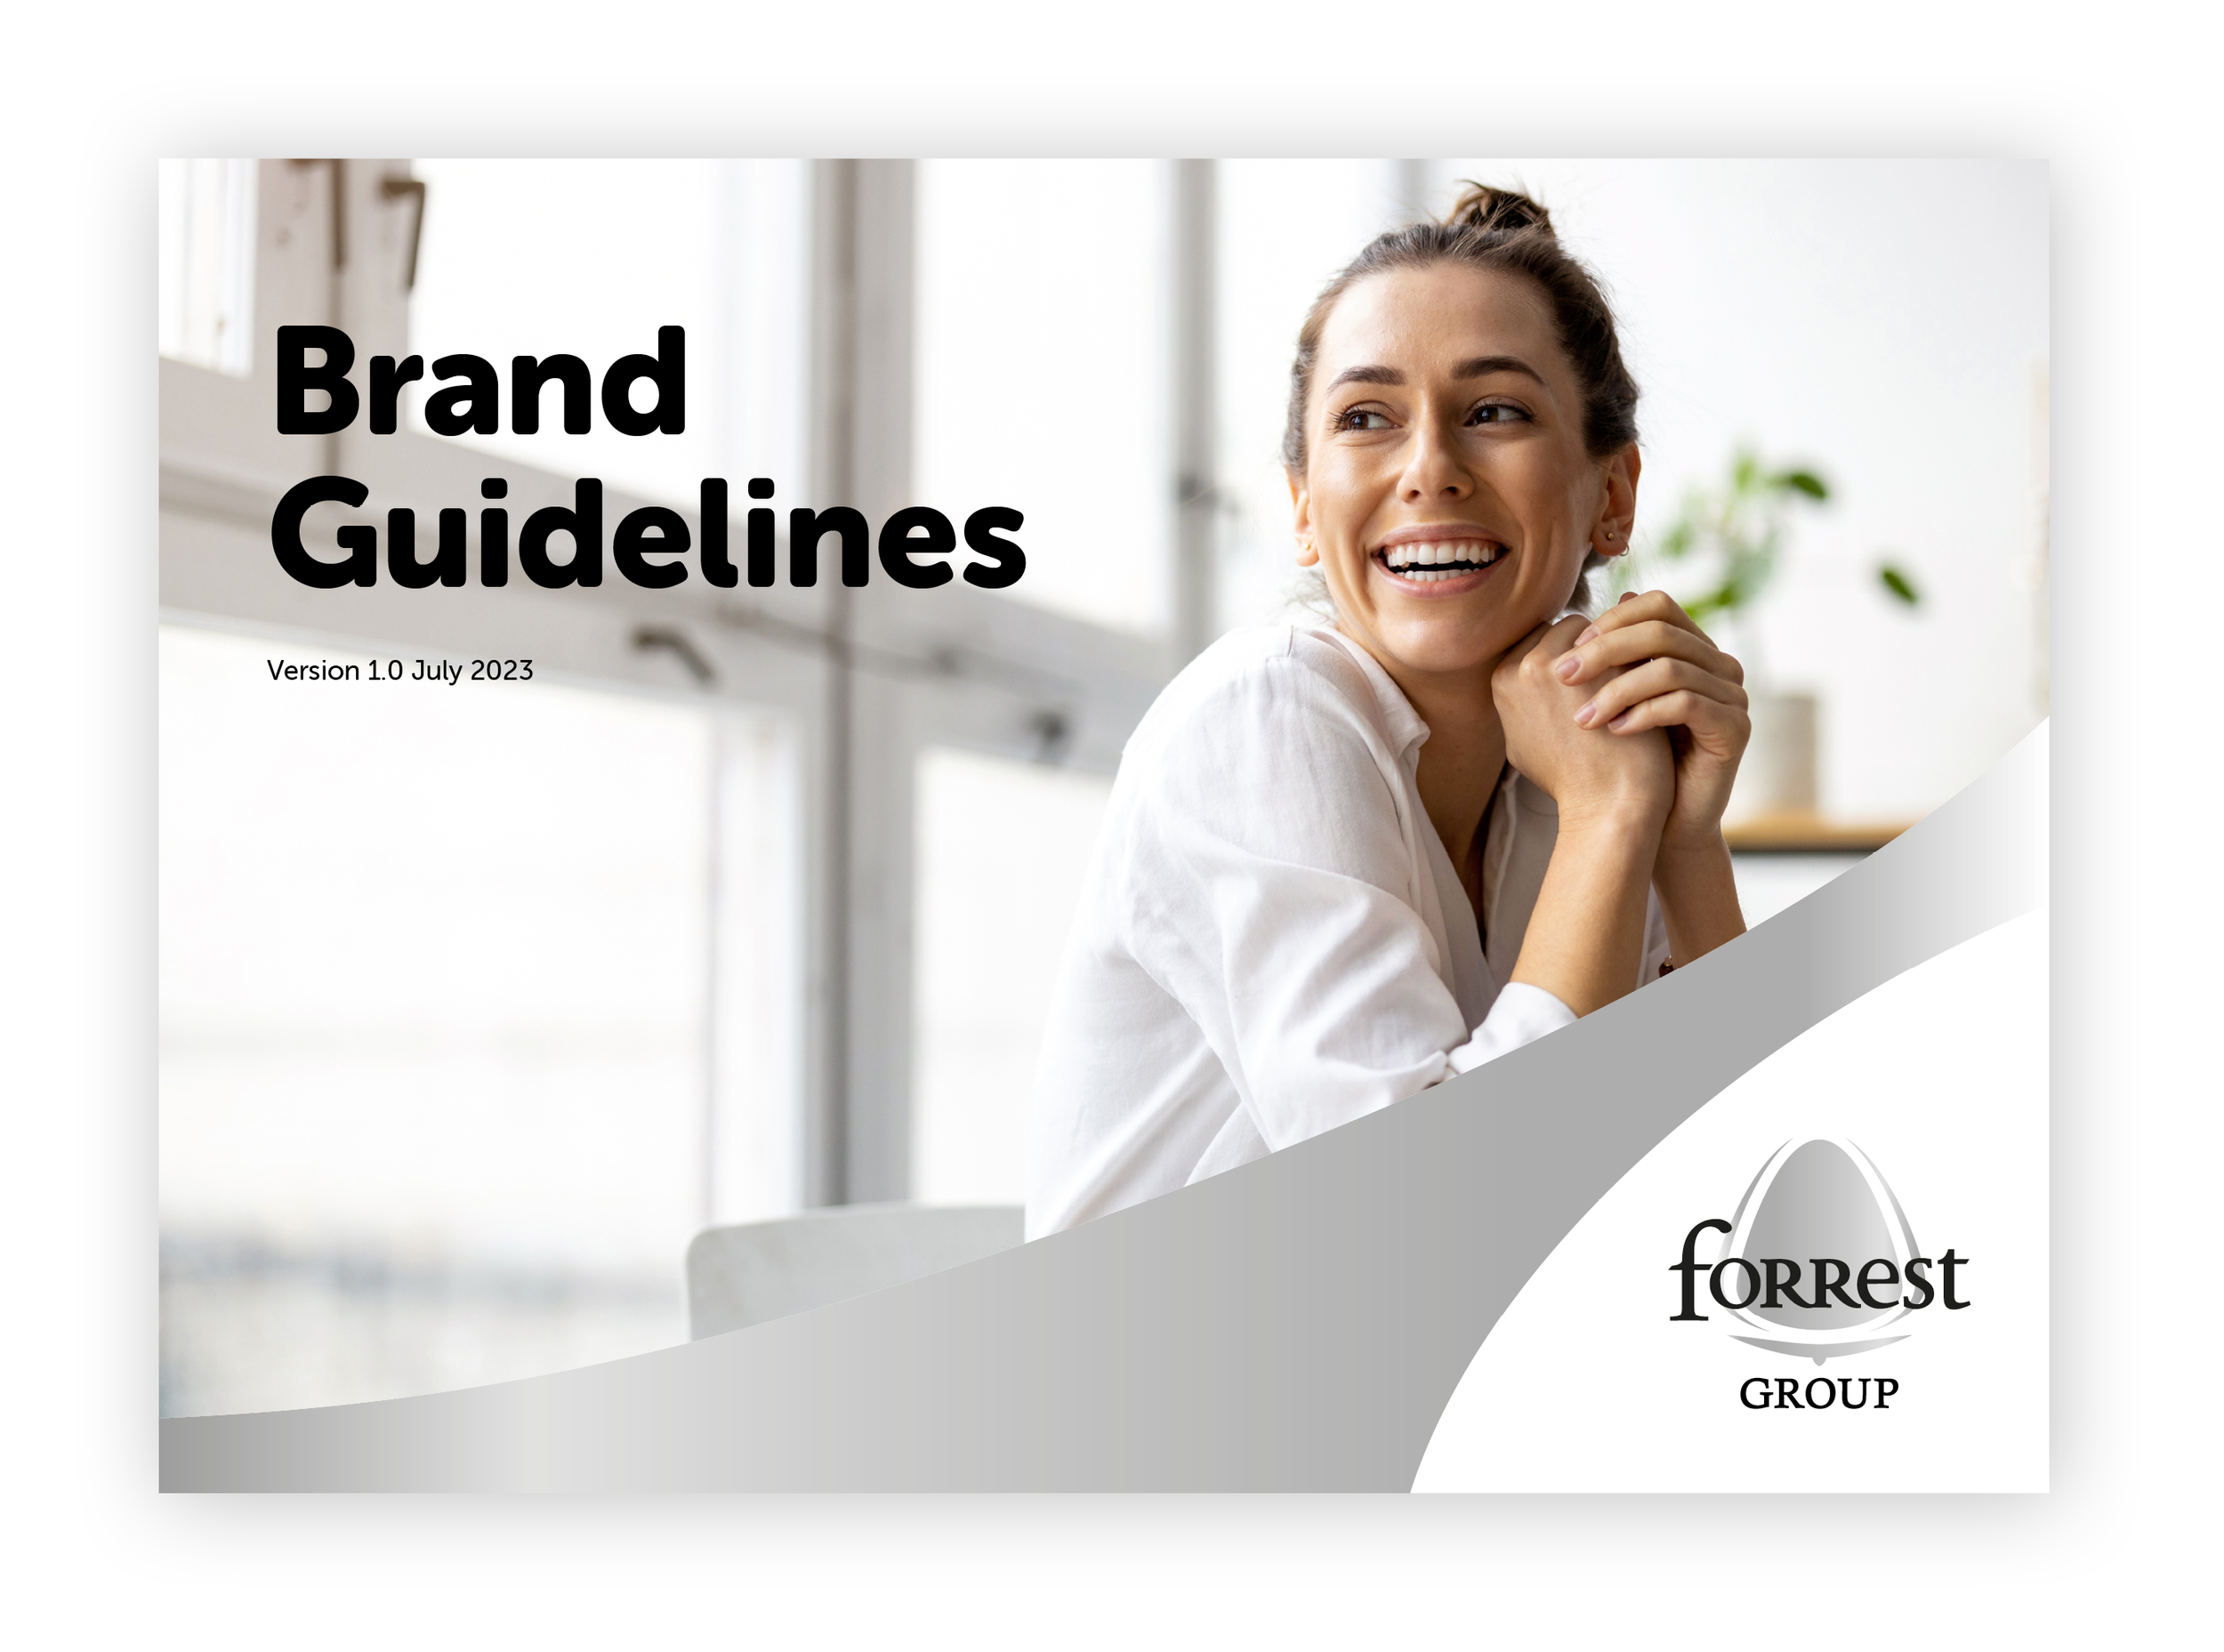 Forrest-Group-brand guidelines_1.png